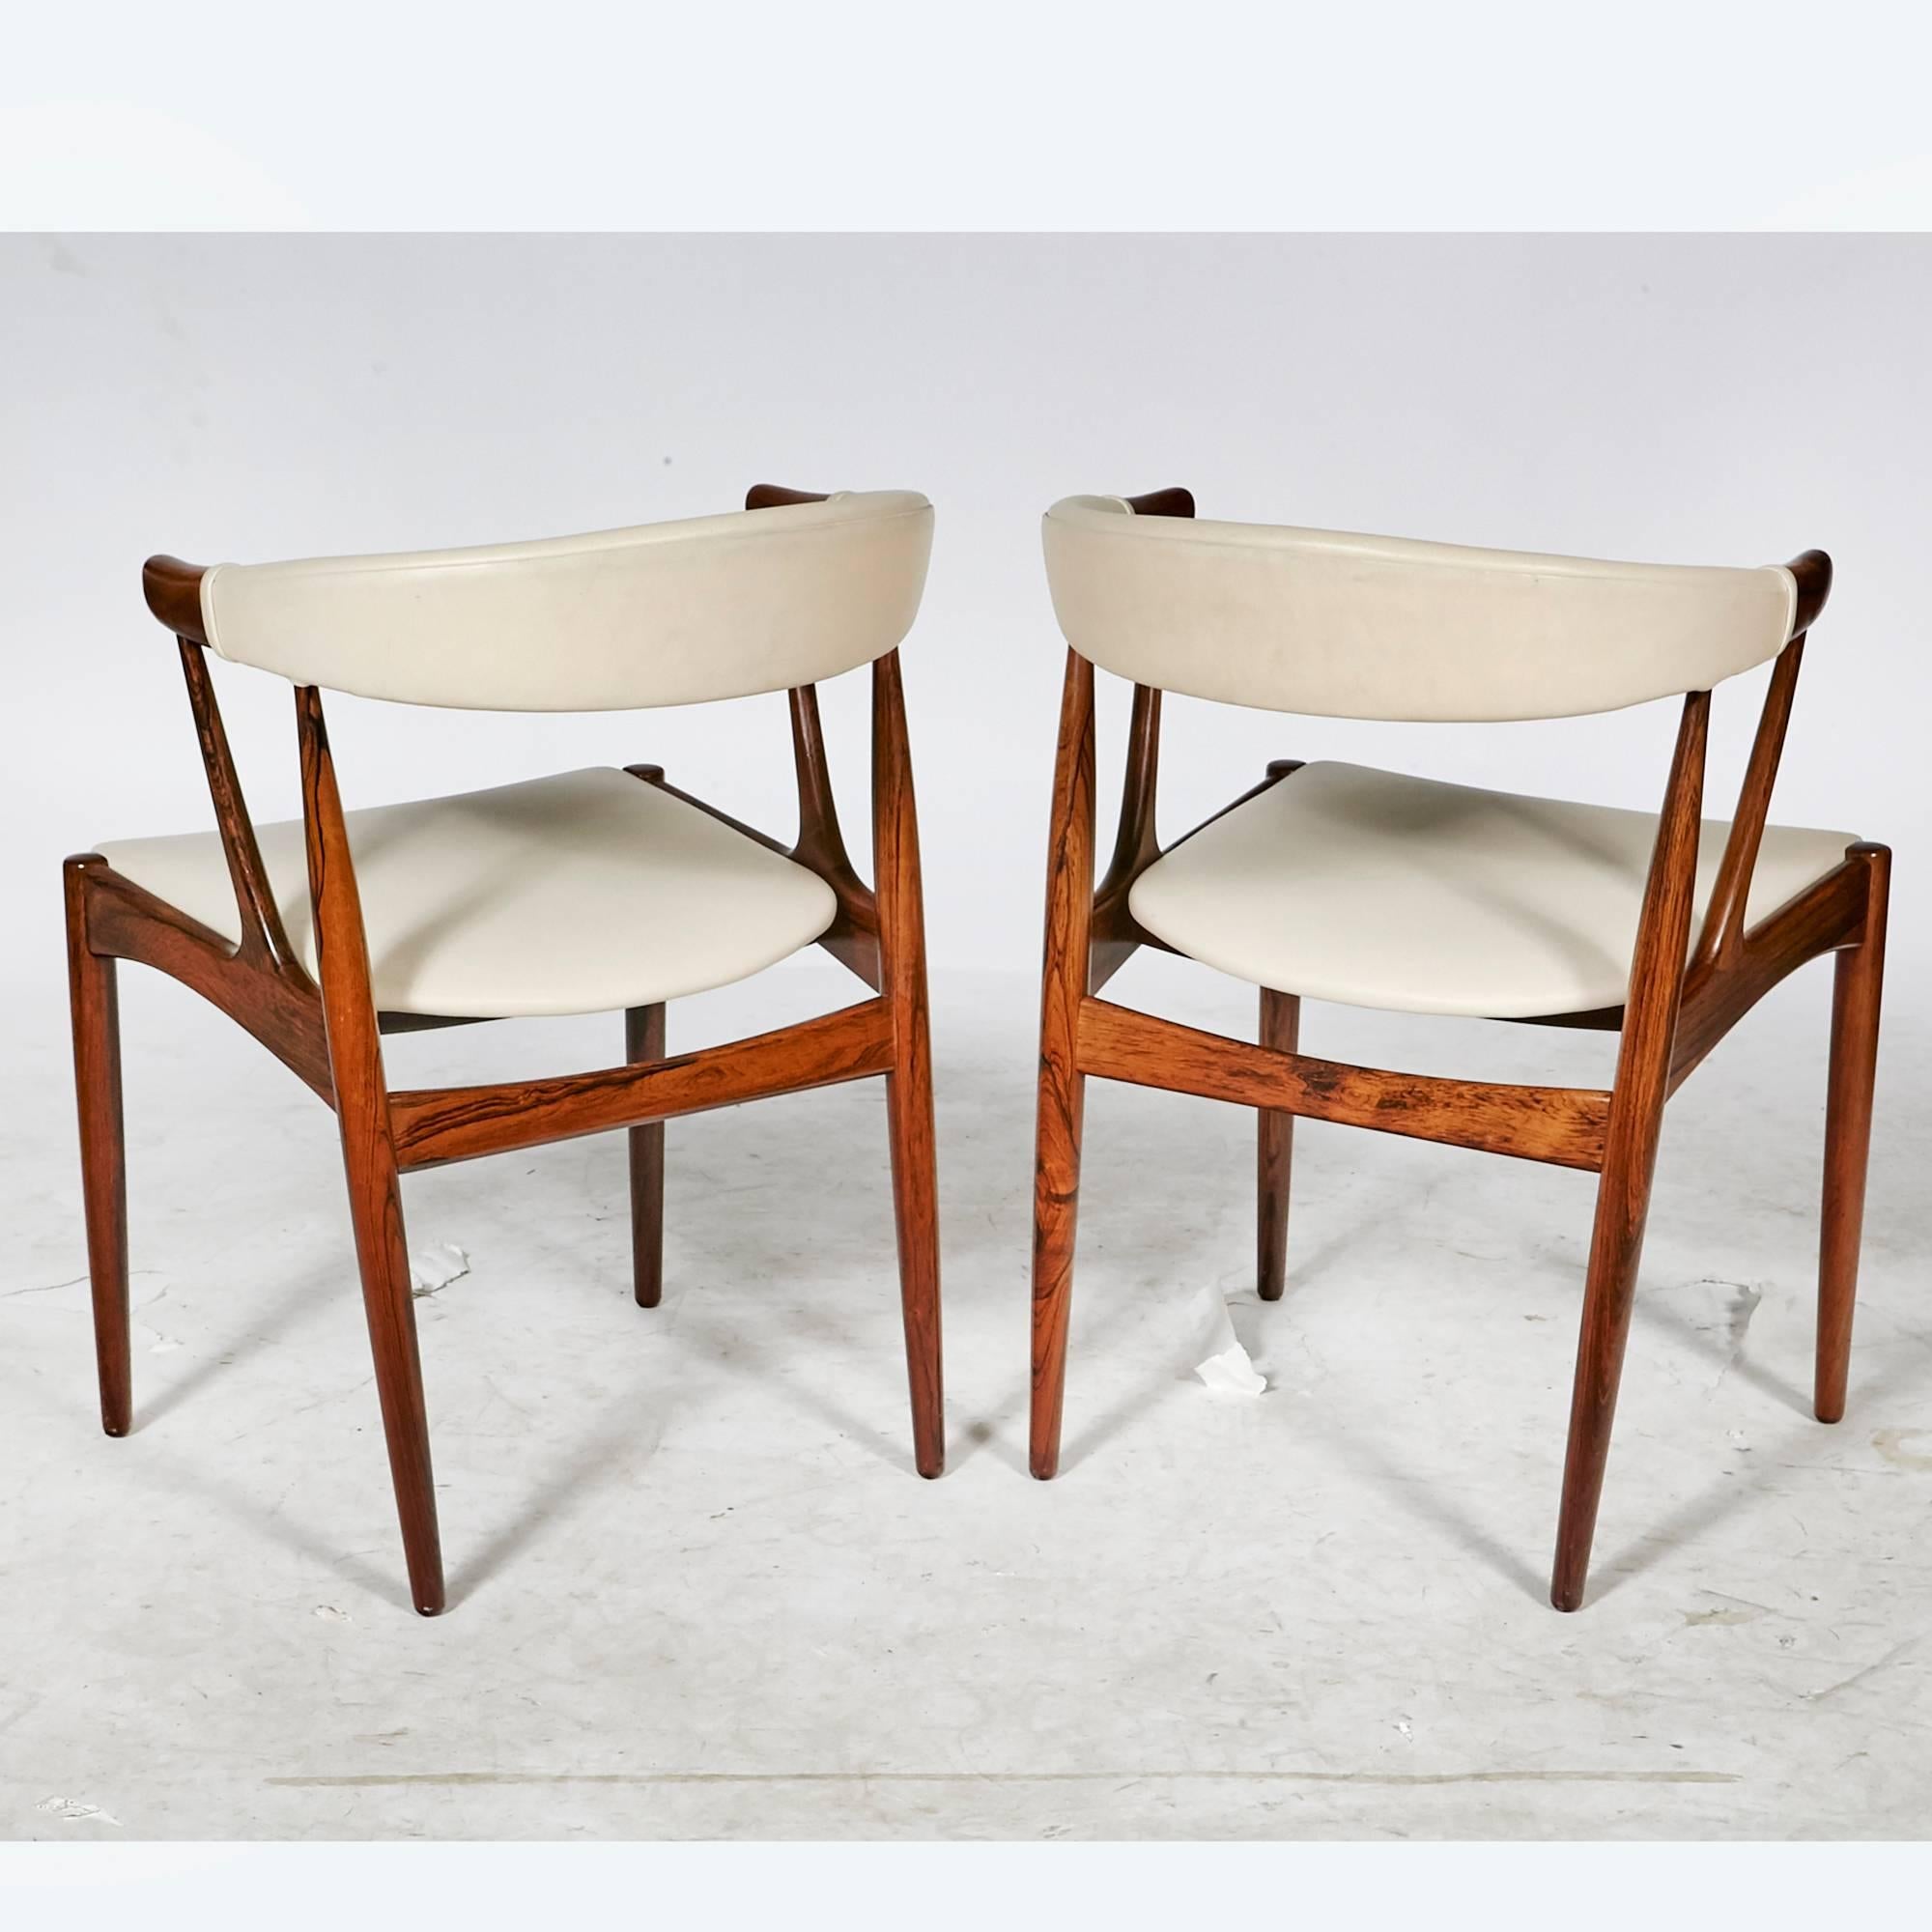 20th Century Danish Rosewood and Leather Dining Chairs by Johannes Andersen, 1960s For Sale